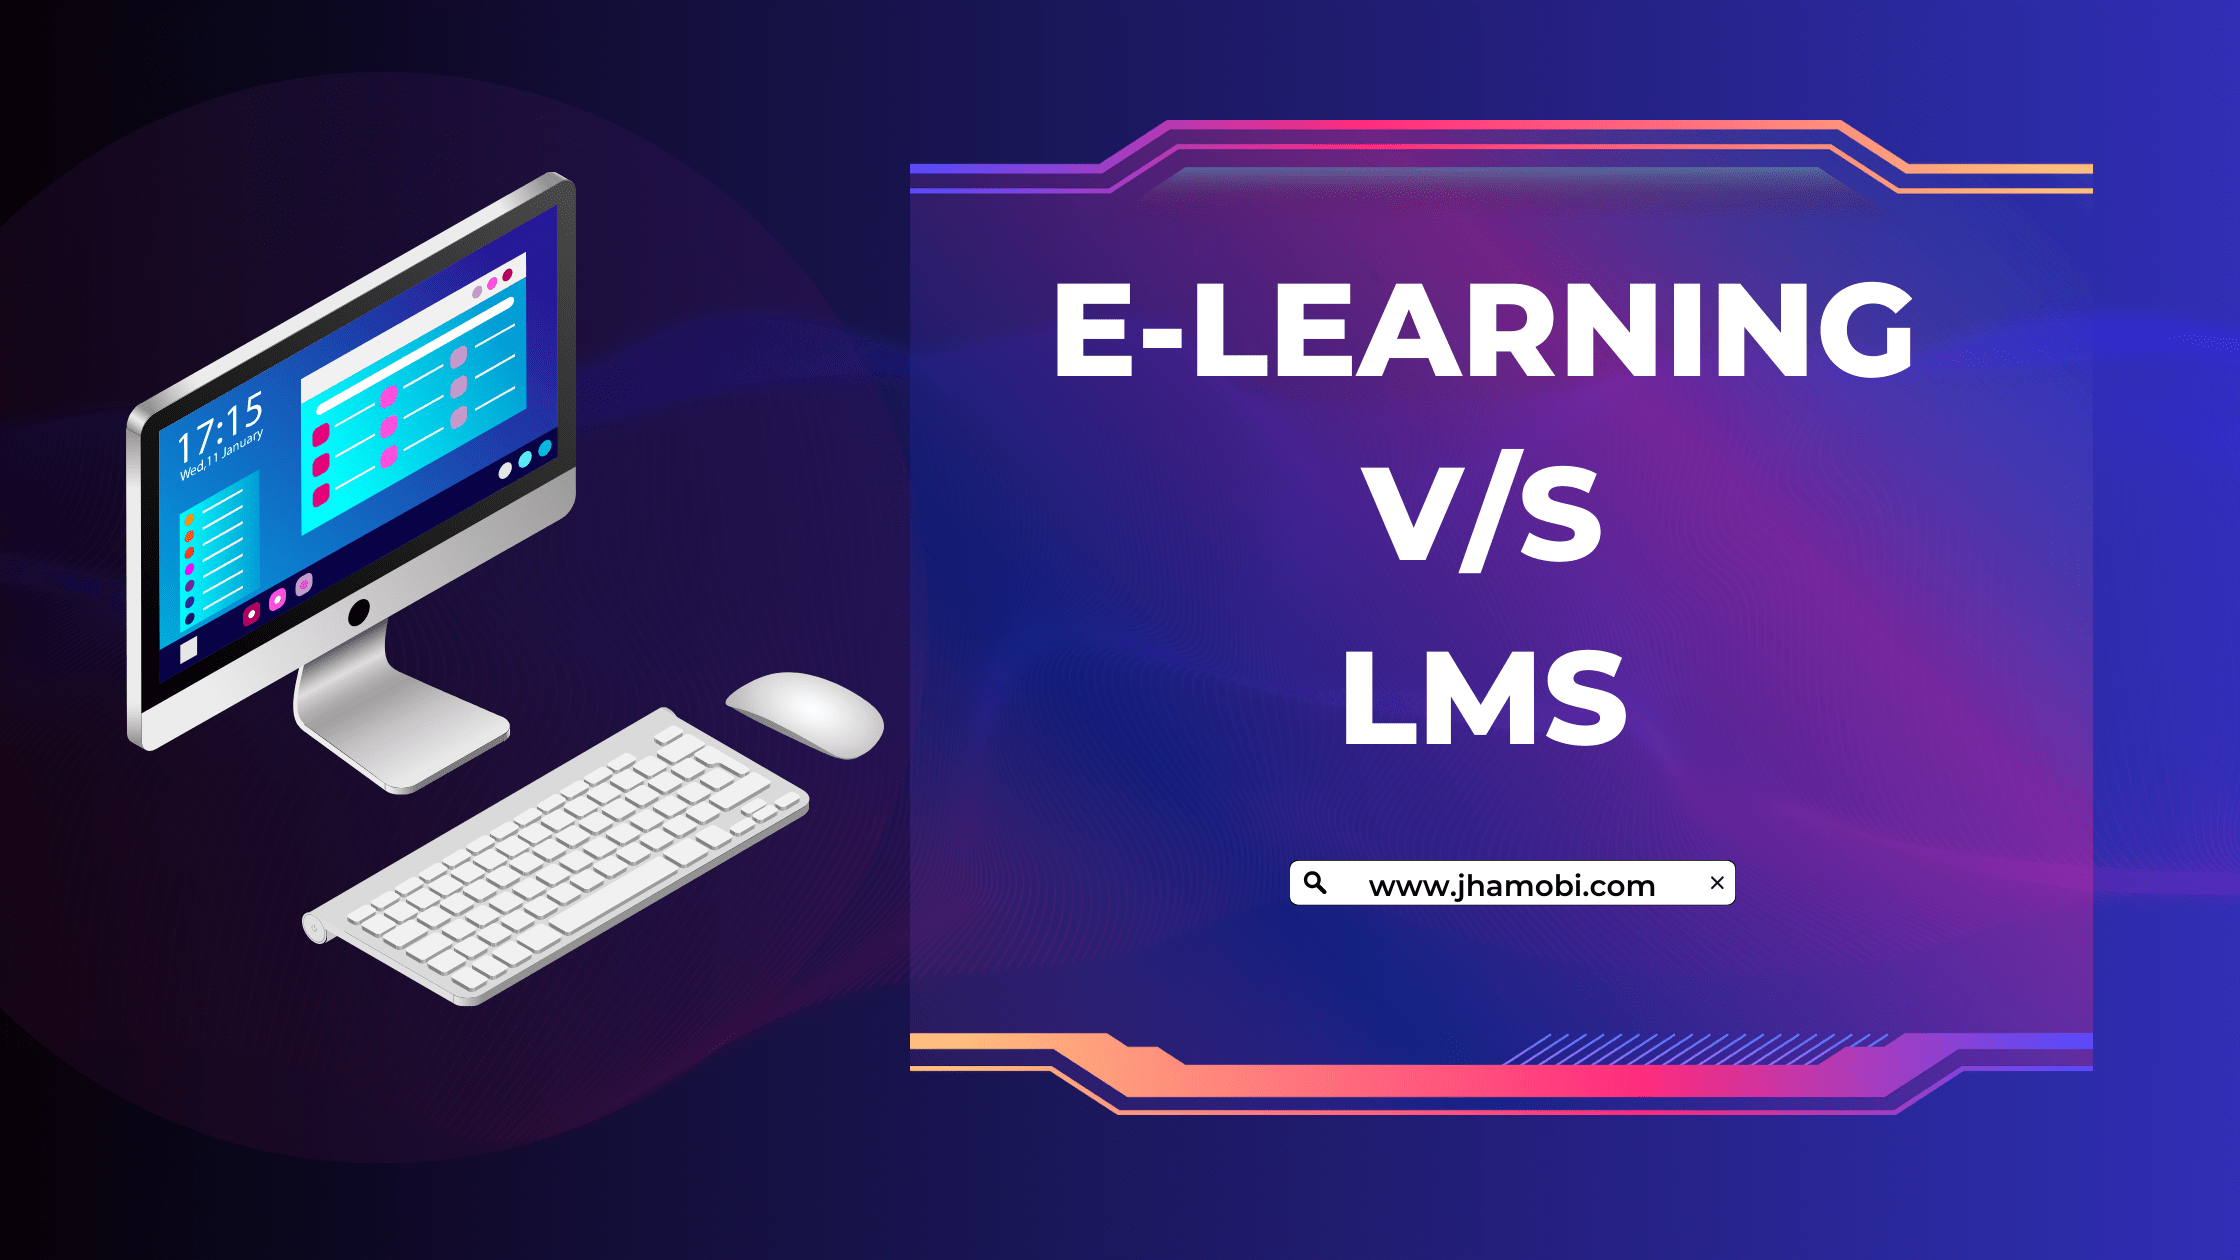 Top 5 Essential differences between an e-learning platform and a learning management system (LMS)